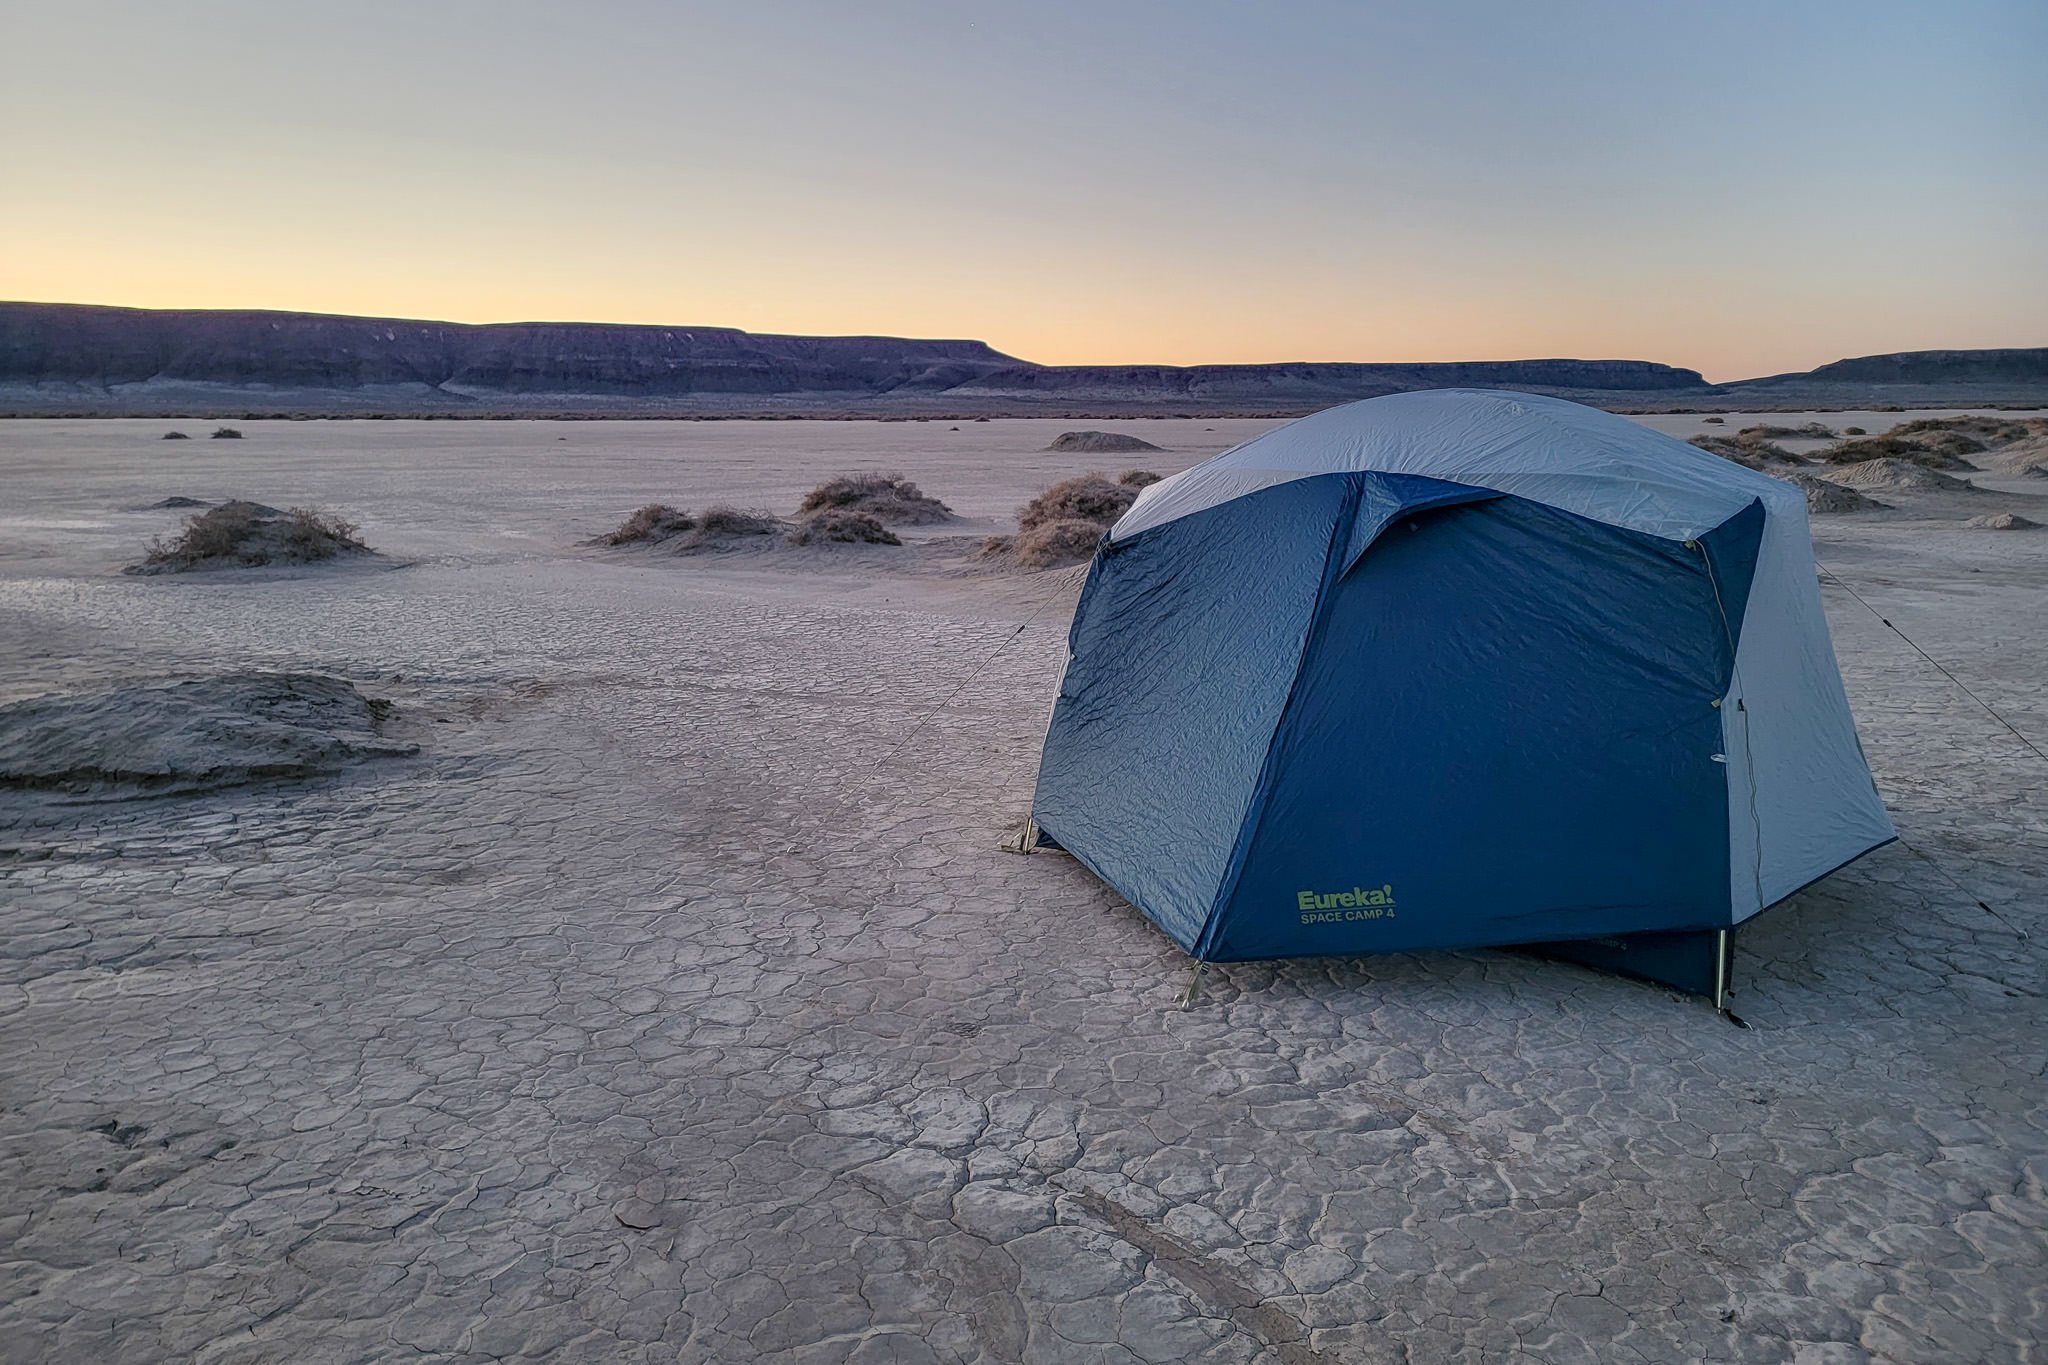 The Eureka Space Camp 4 Tent in the Alvord Desert at sunrise